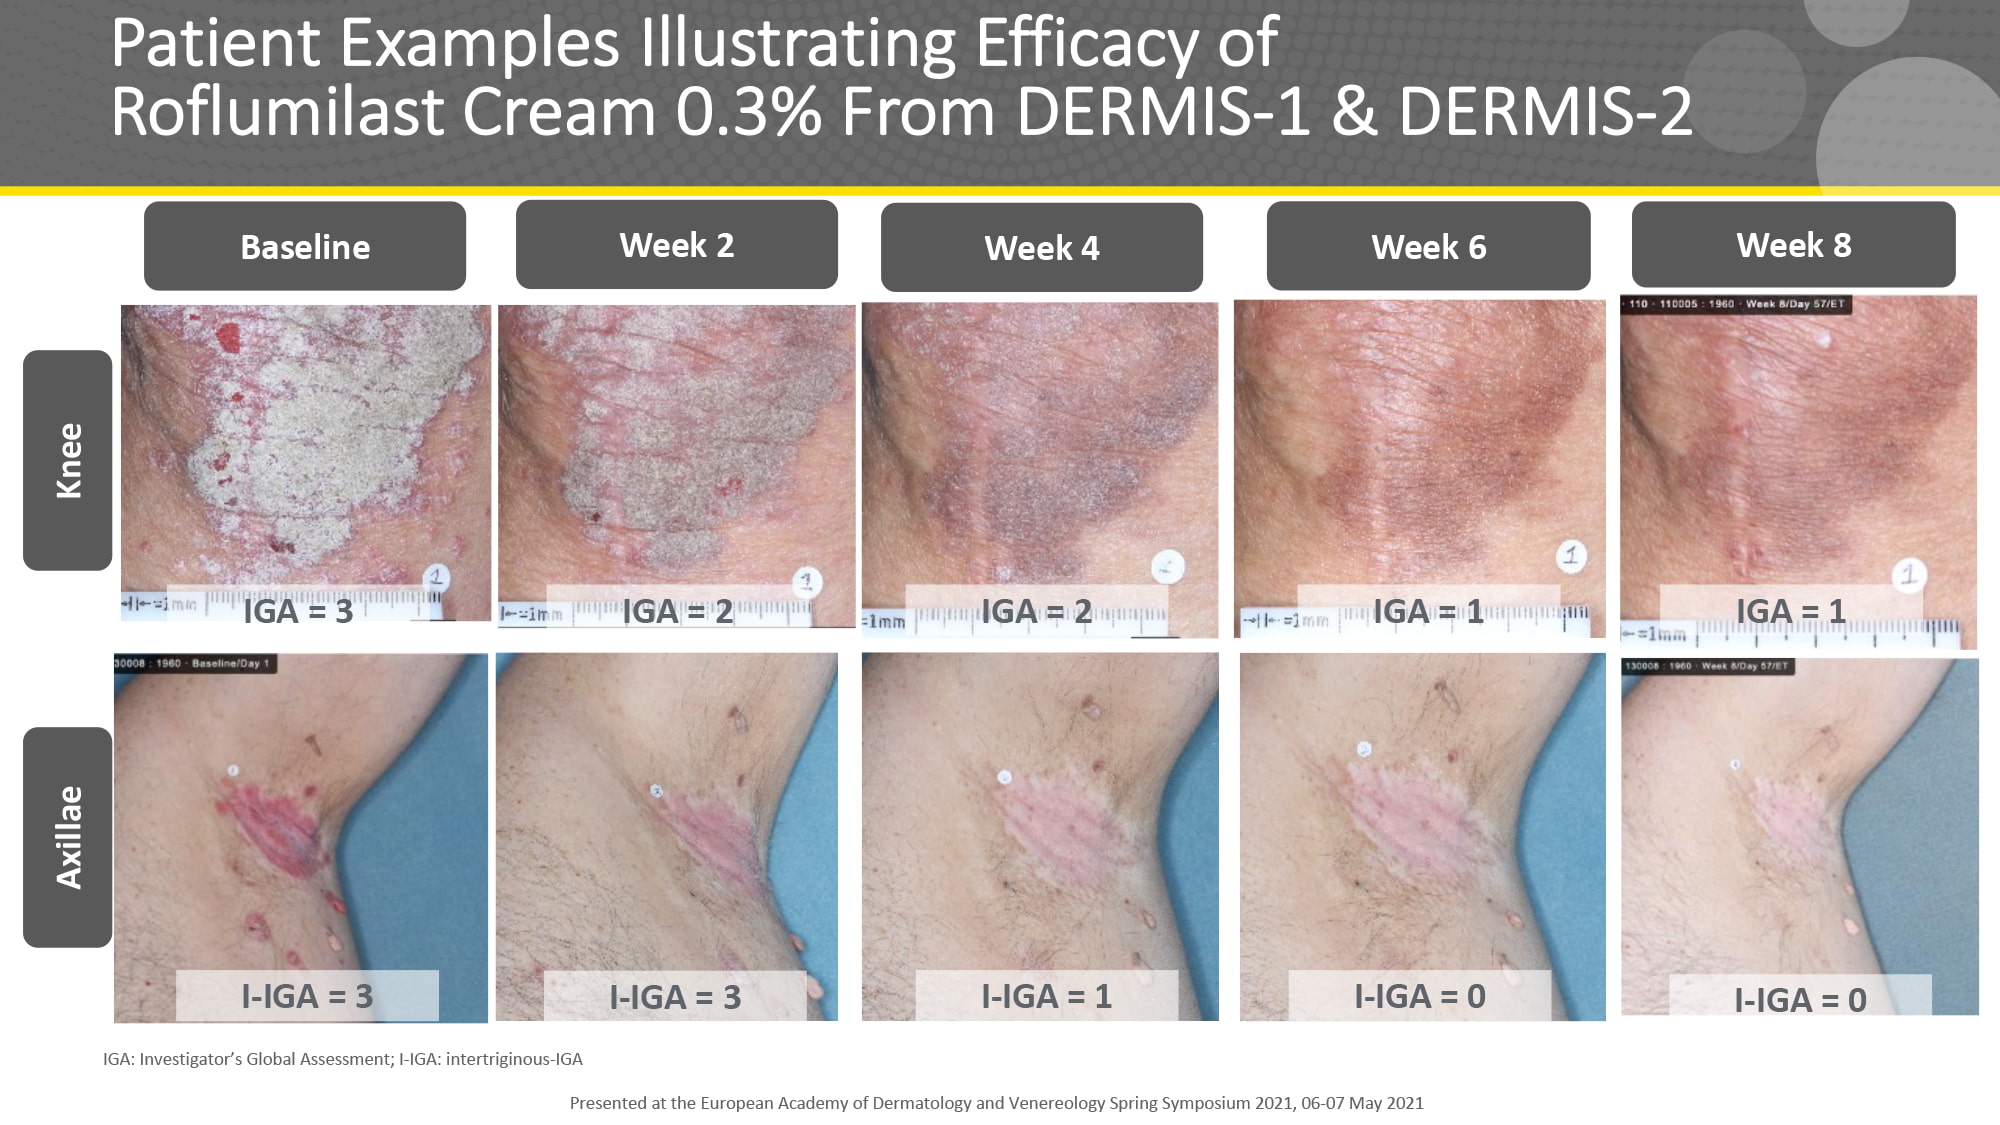 roflumilast psoriasis results 05 - Zoryve: New Effective Cream for Psoriasis